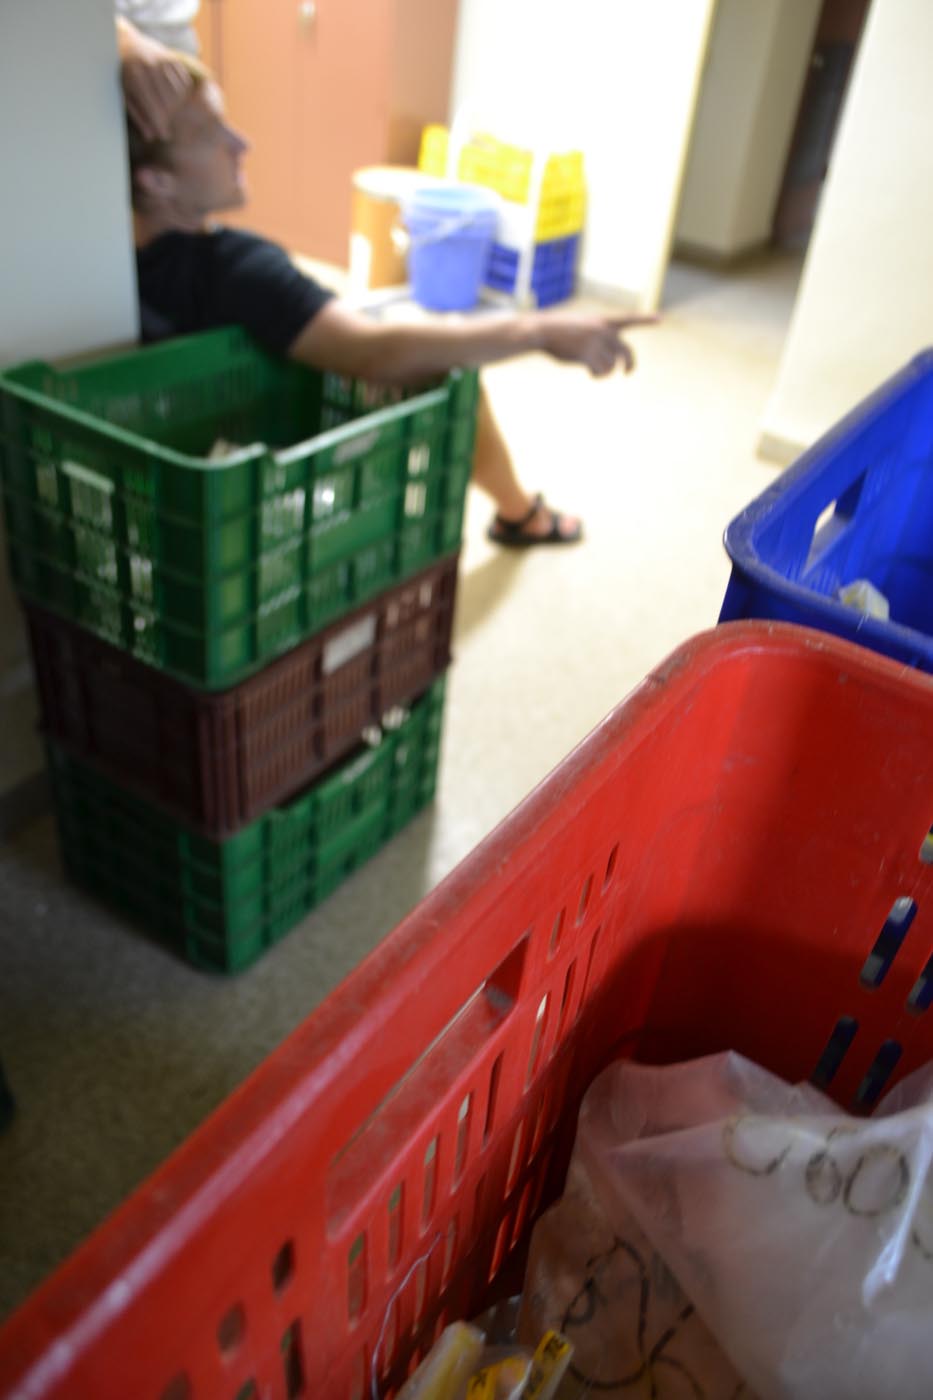  Samples are housed in plastic crates, carefully labeled and arranged by date and location.